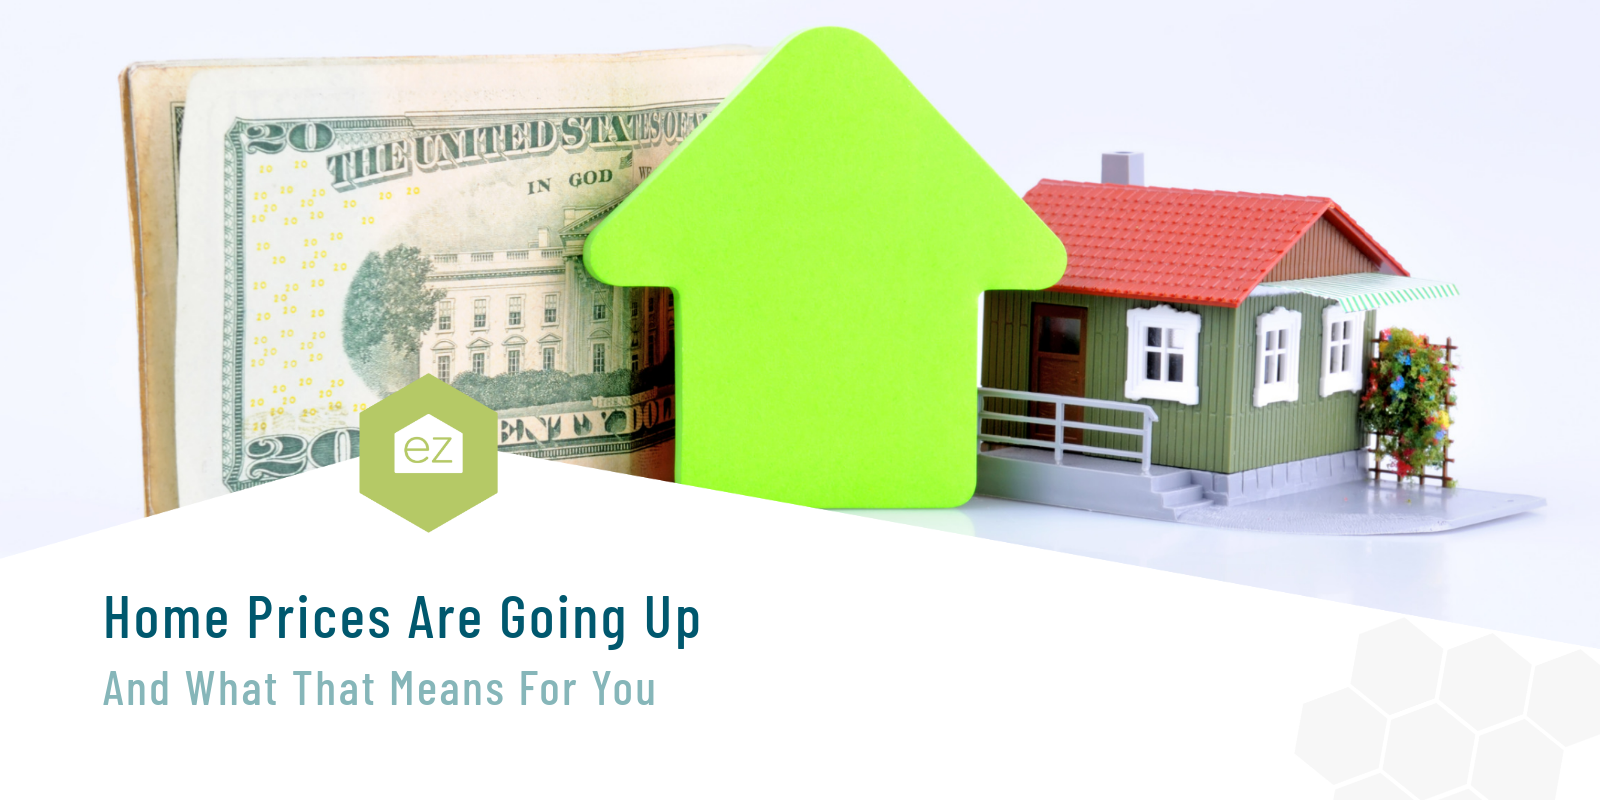 Home Prices Are Going UpAnd What That Means For You